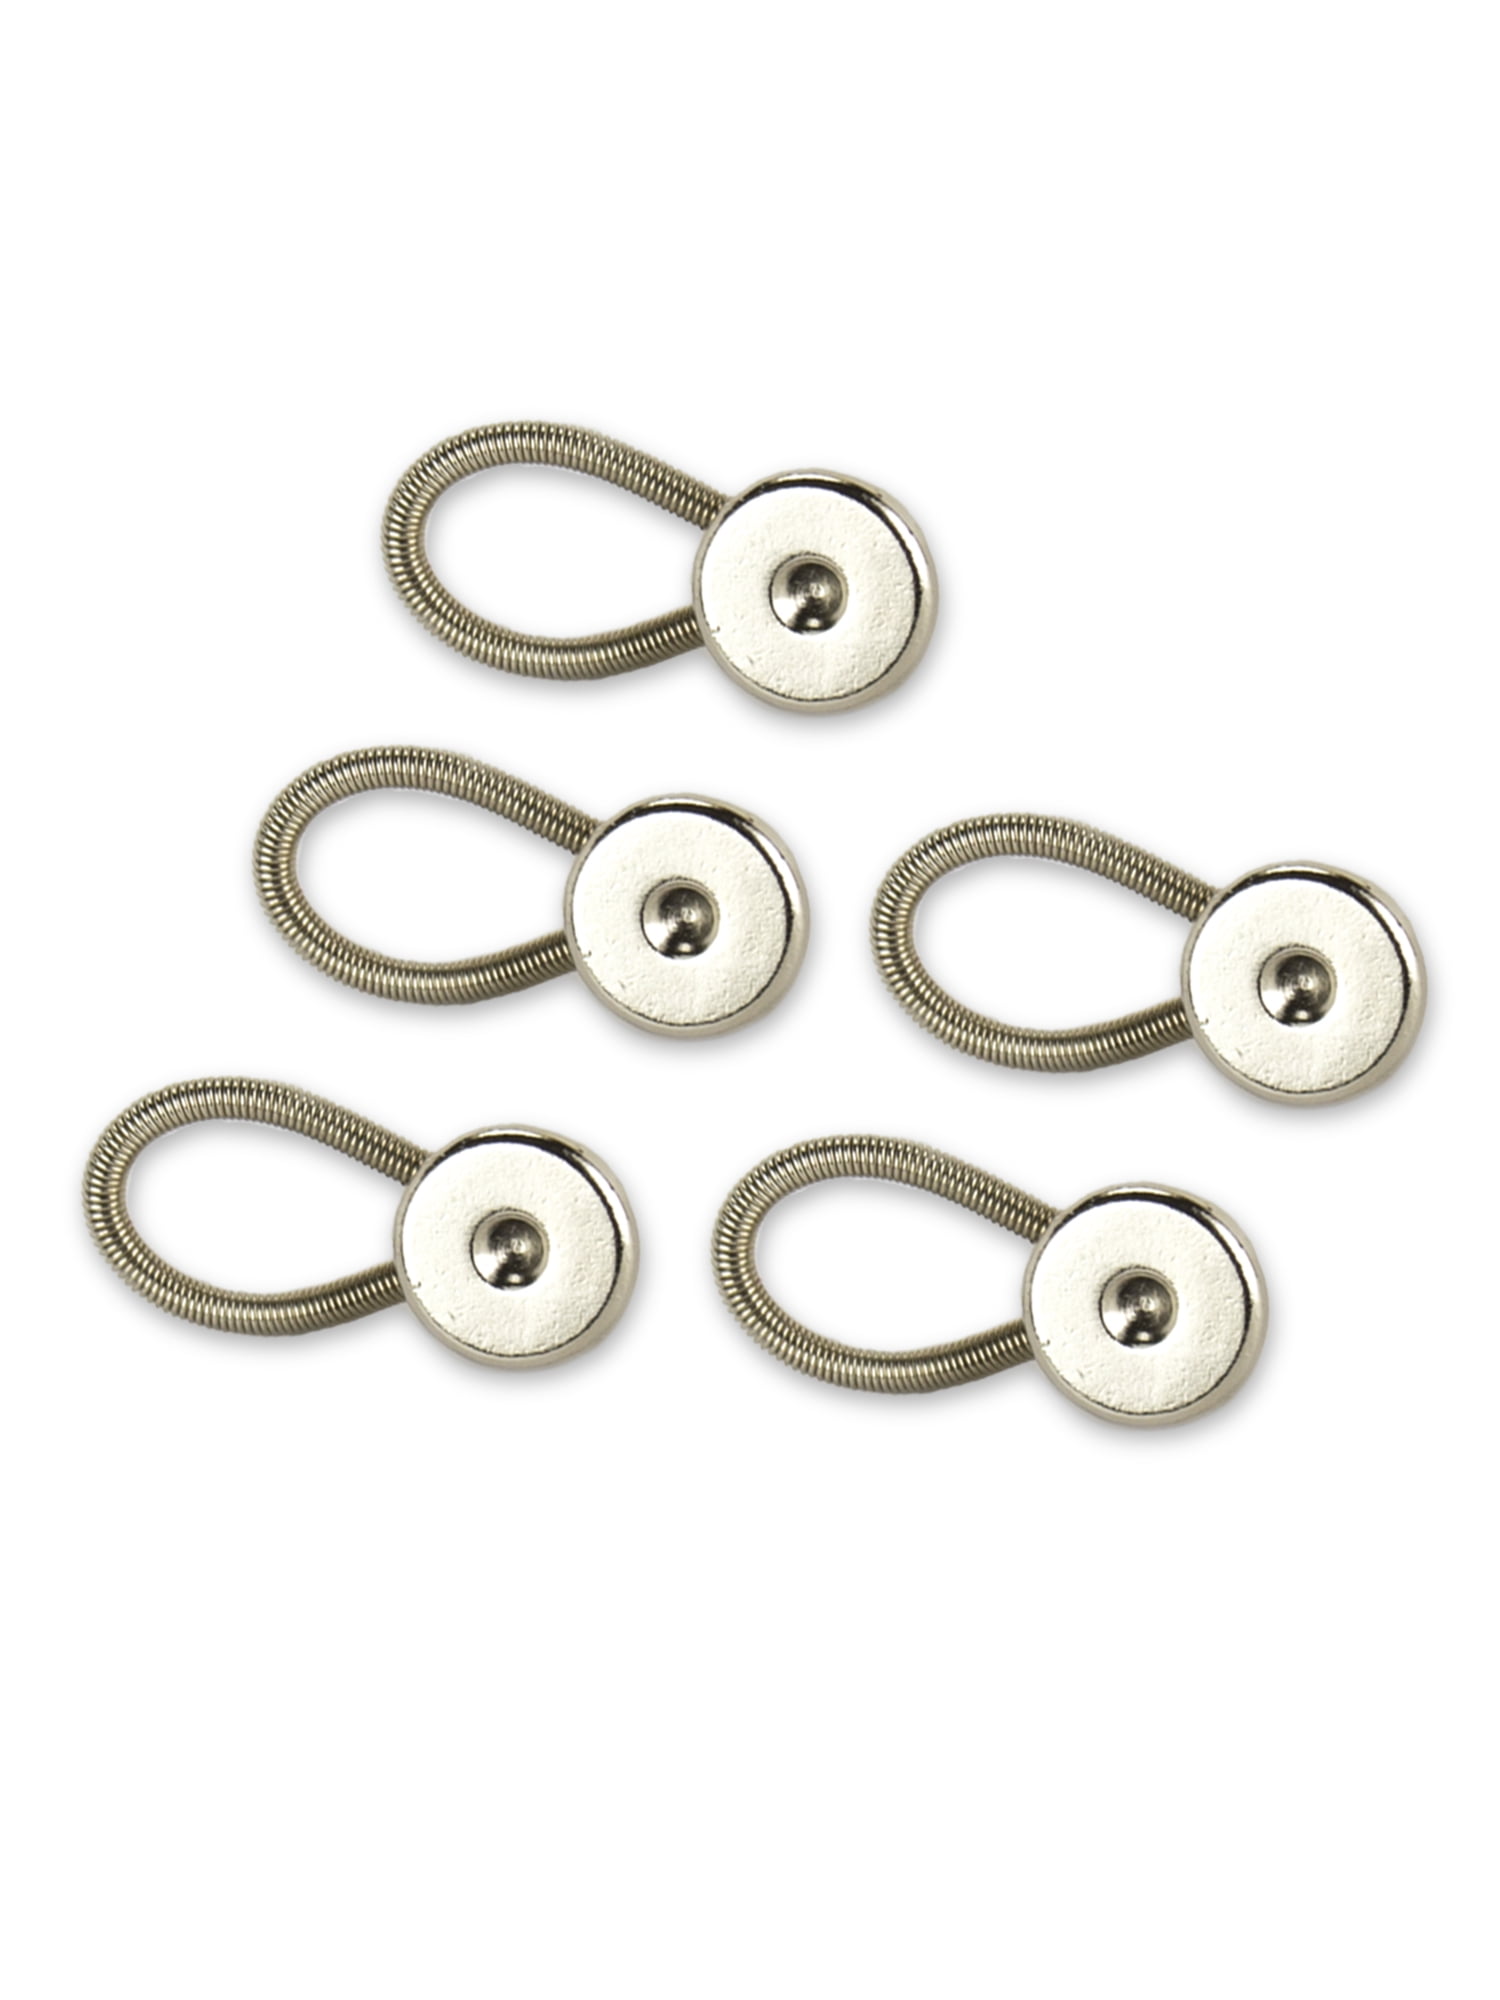 4 Pack Expander Button for Men and Women, Collar Extenders/Neck Extender/Wonder Button for Men Dress Shirts, Simple Use, No Sewing, Size: 83 mm x 25